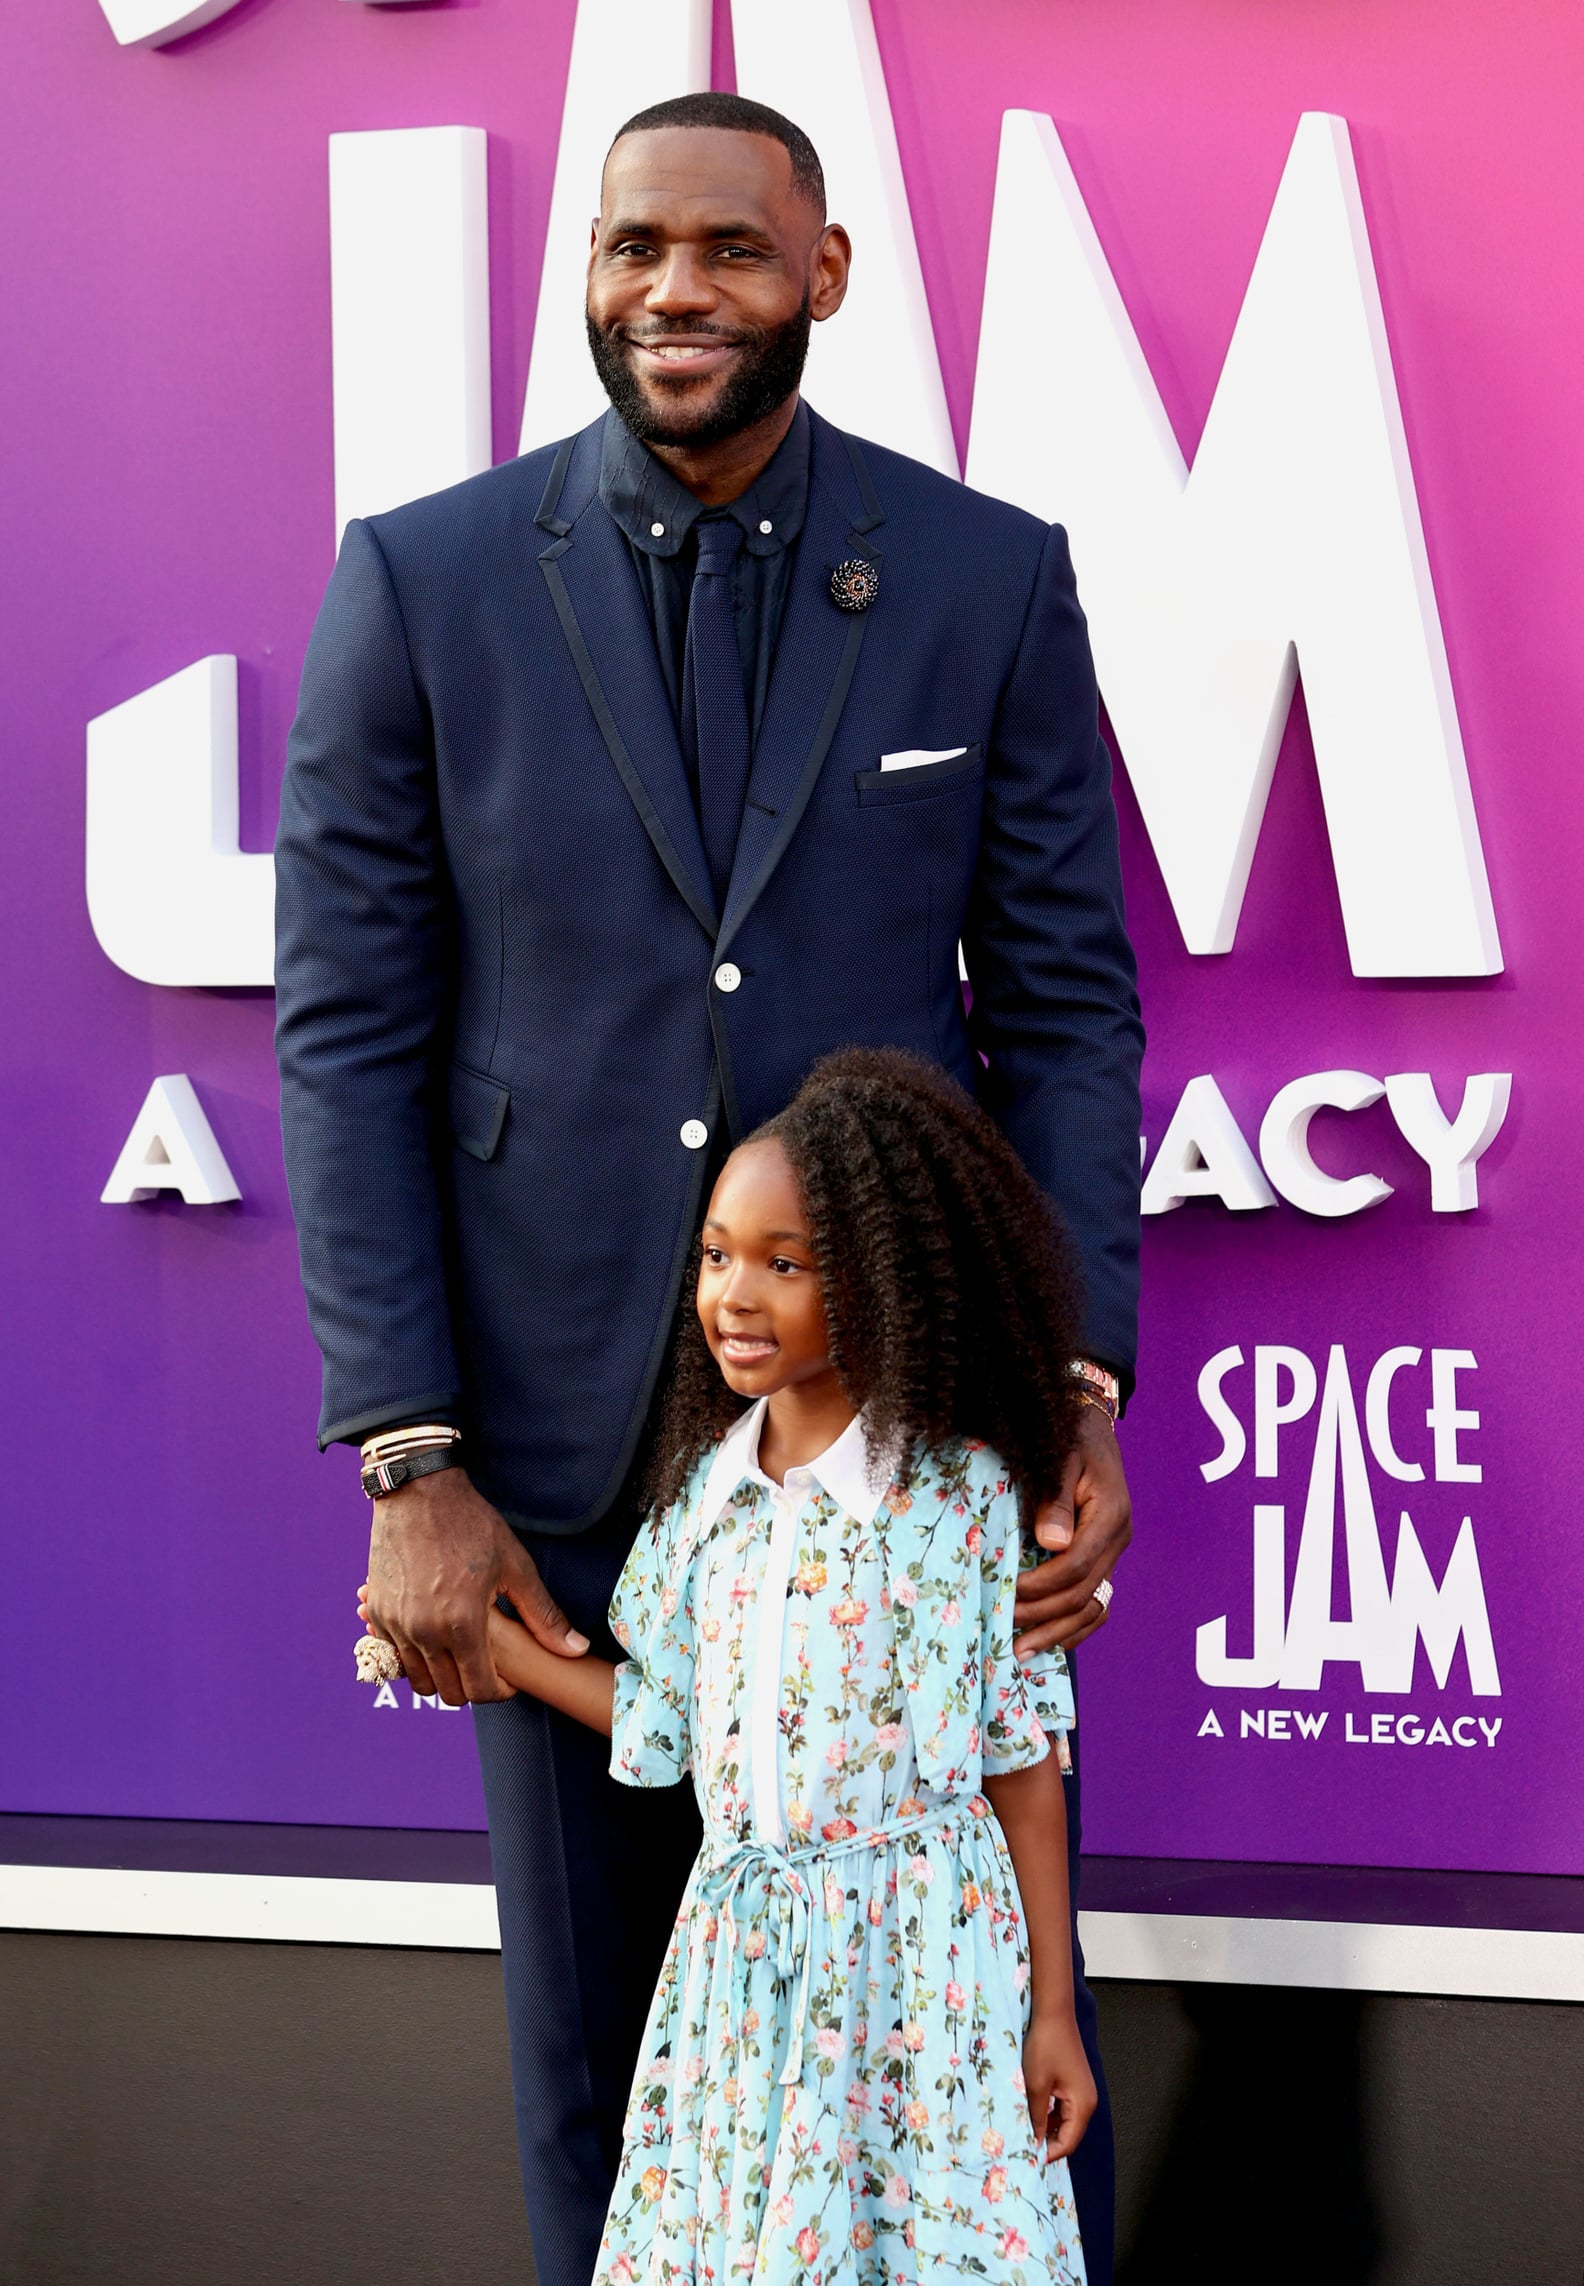 Lebron James Suddenly Appeared In His Daughter's Vlog Video "‘All Things Zhuri", Surprising The Whole World With The Cooking Talent Of Father And Daughter - Car Magazine TV